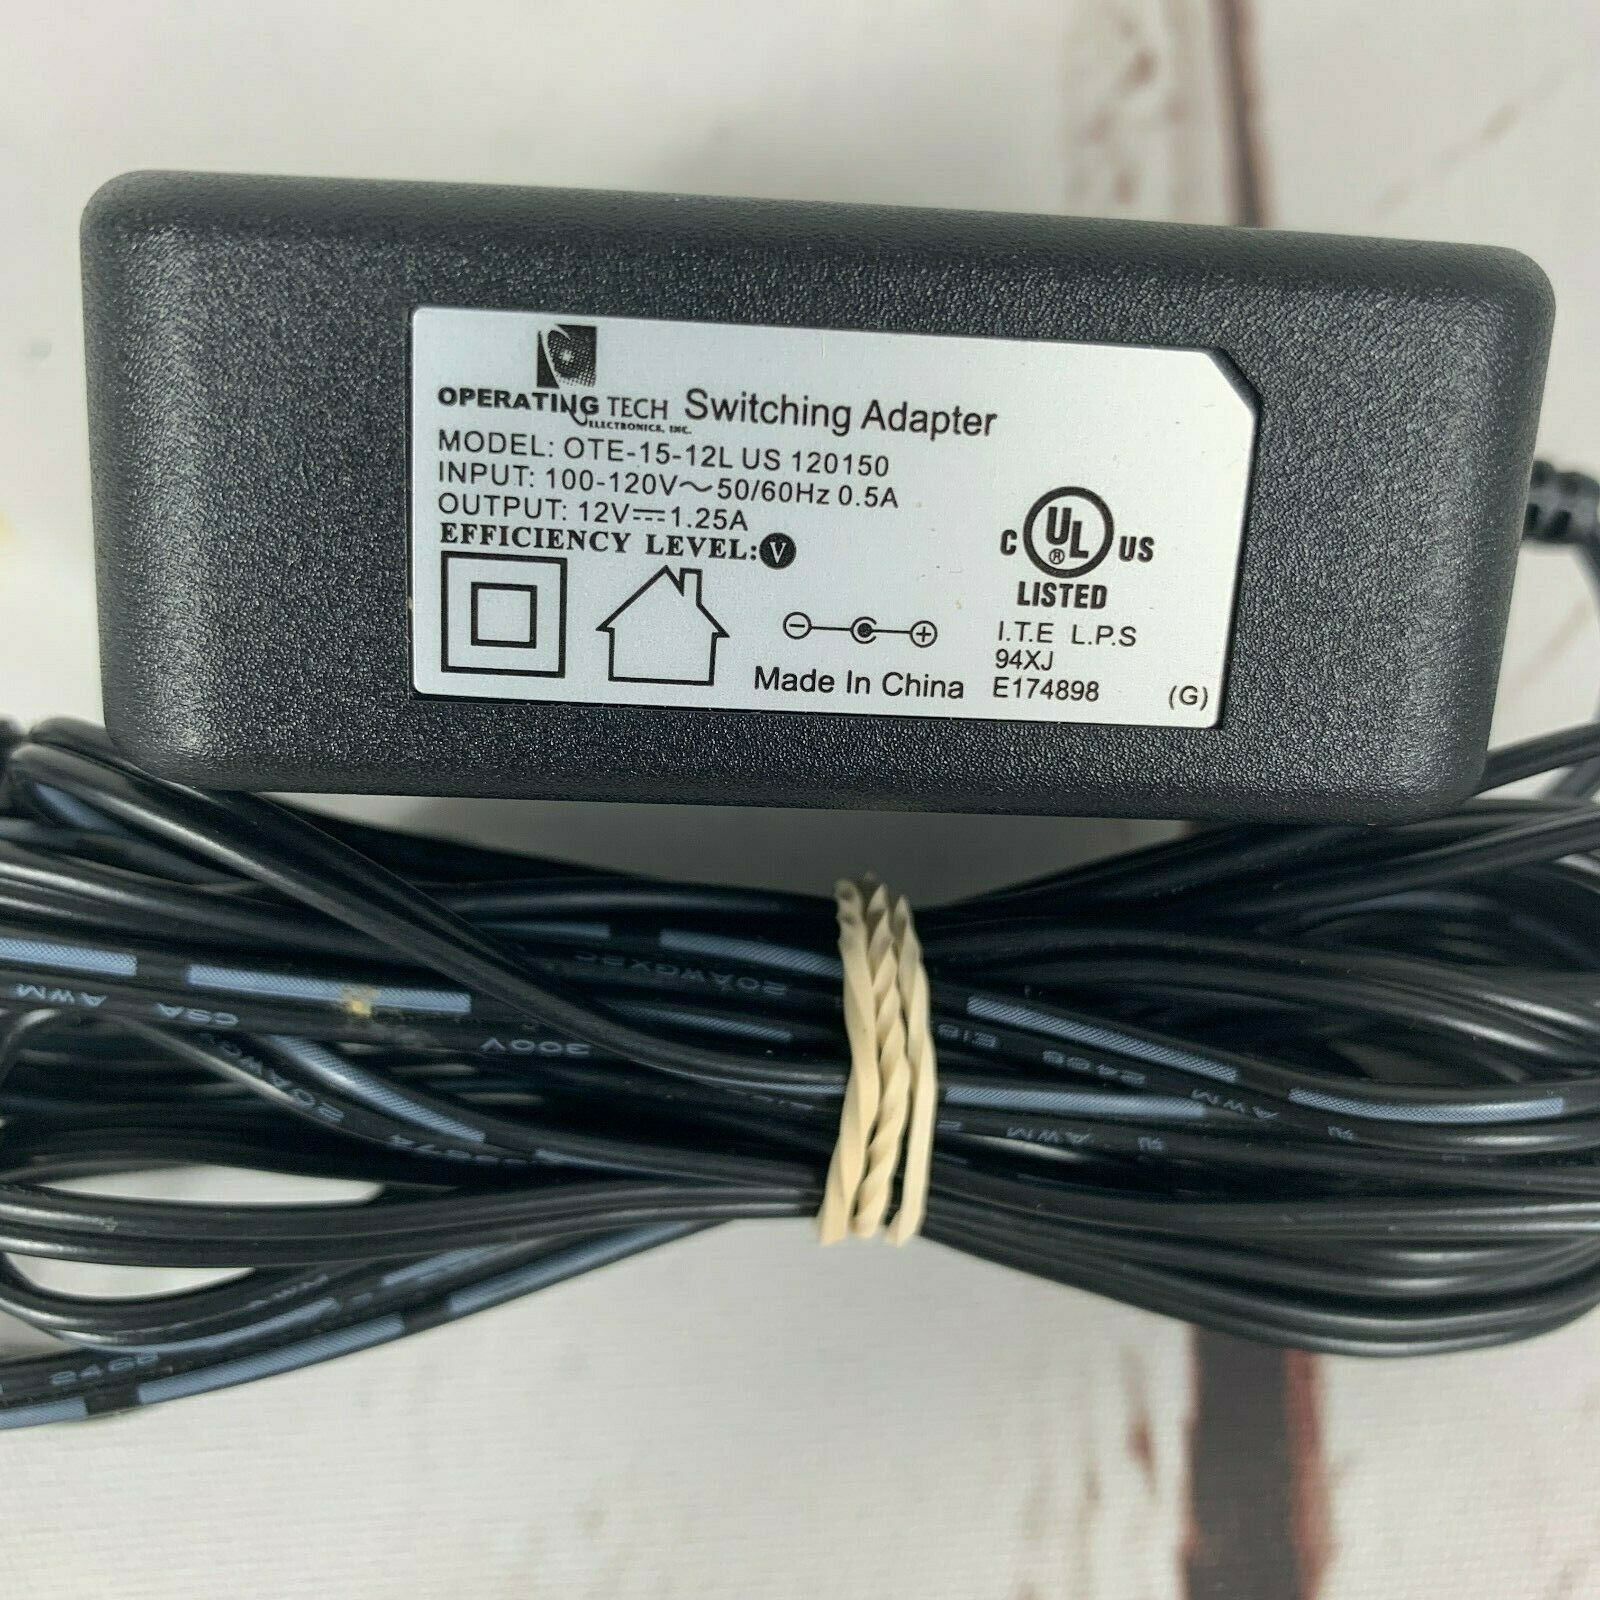 New OperatingTech OTE-15-12L 12V 1.25A AC DC Power Supply Adapter Charger